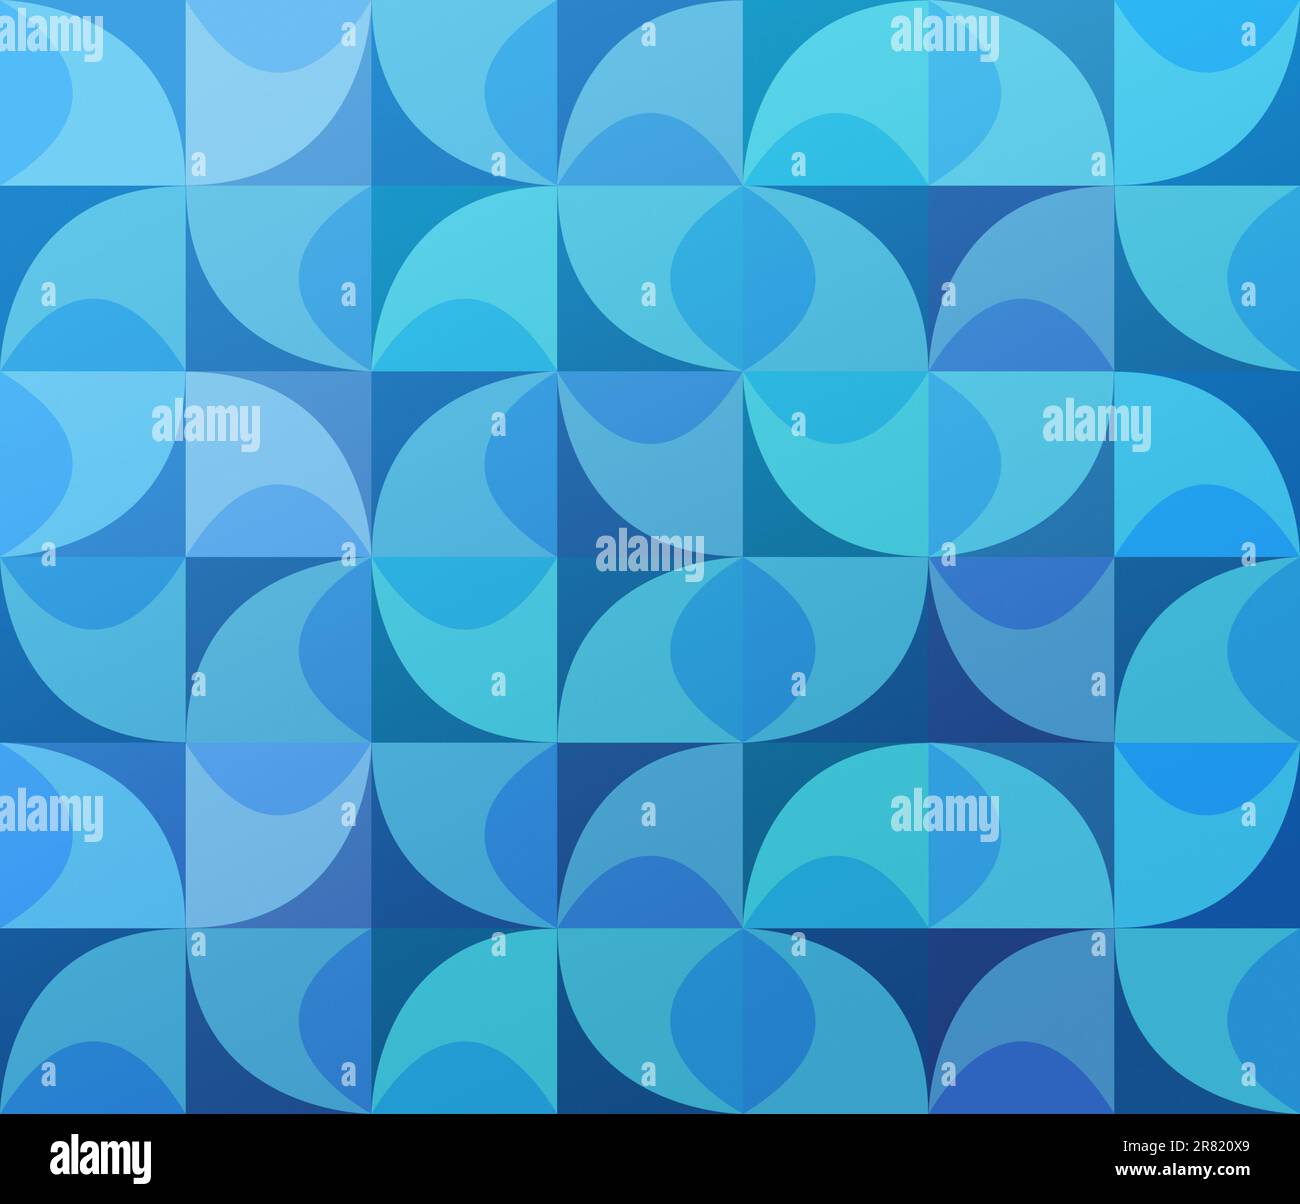 Abstract background with blue, light blue and turquoise geometric curved shapes. Vibrant retro Bauhaus pattern illustration, copy space. Stock Photo